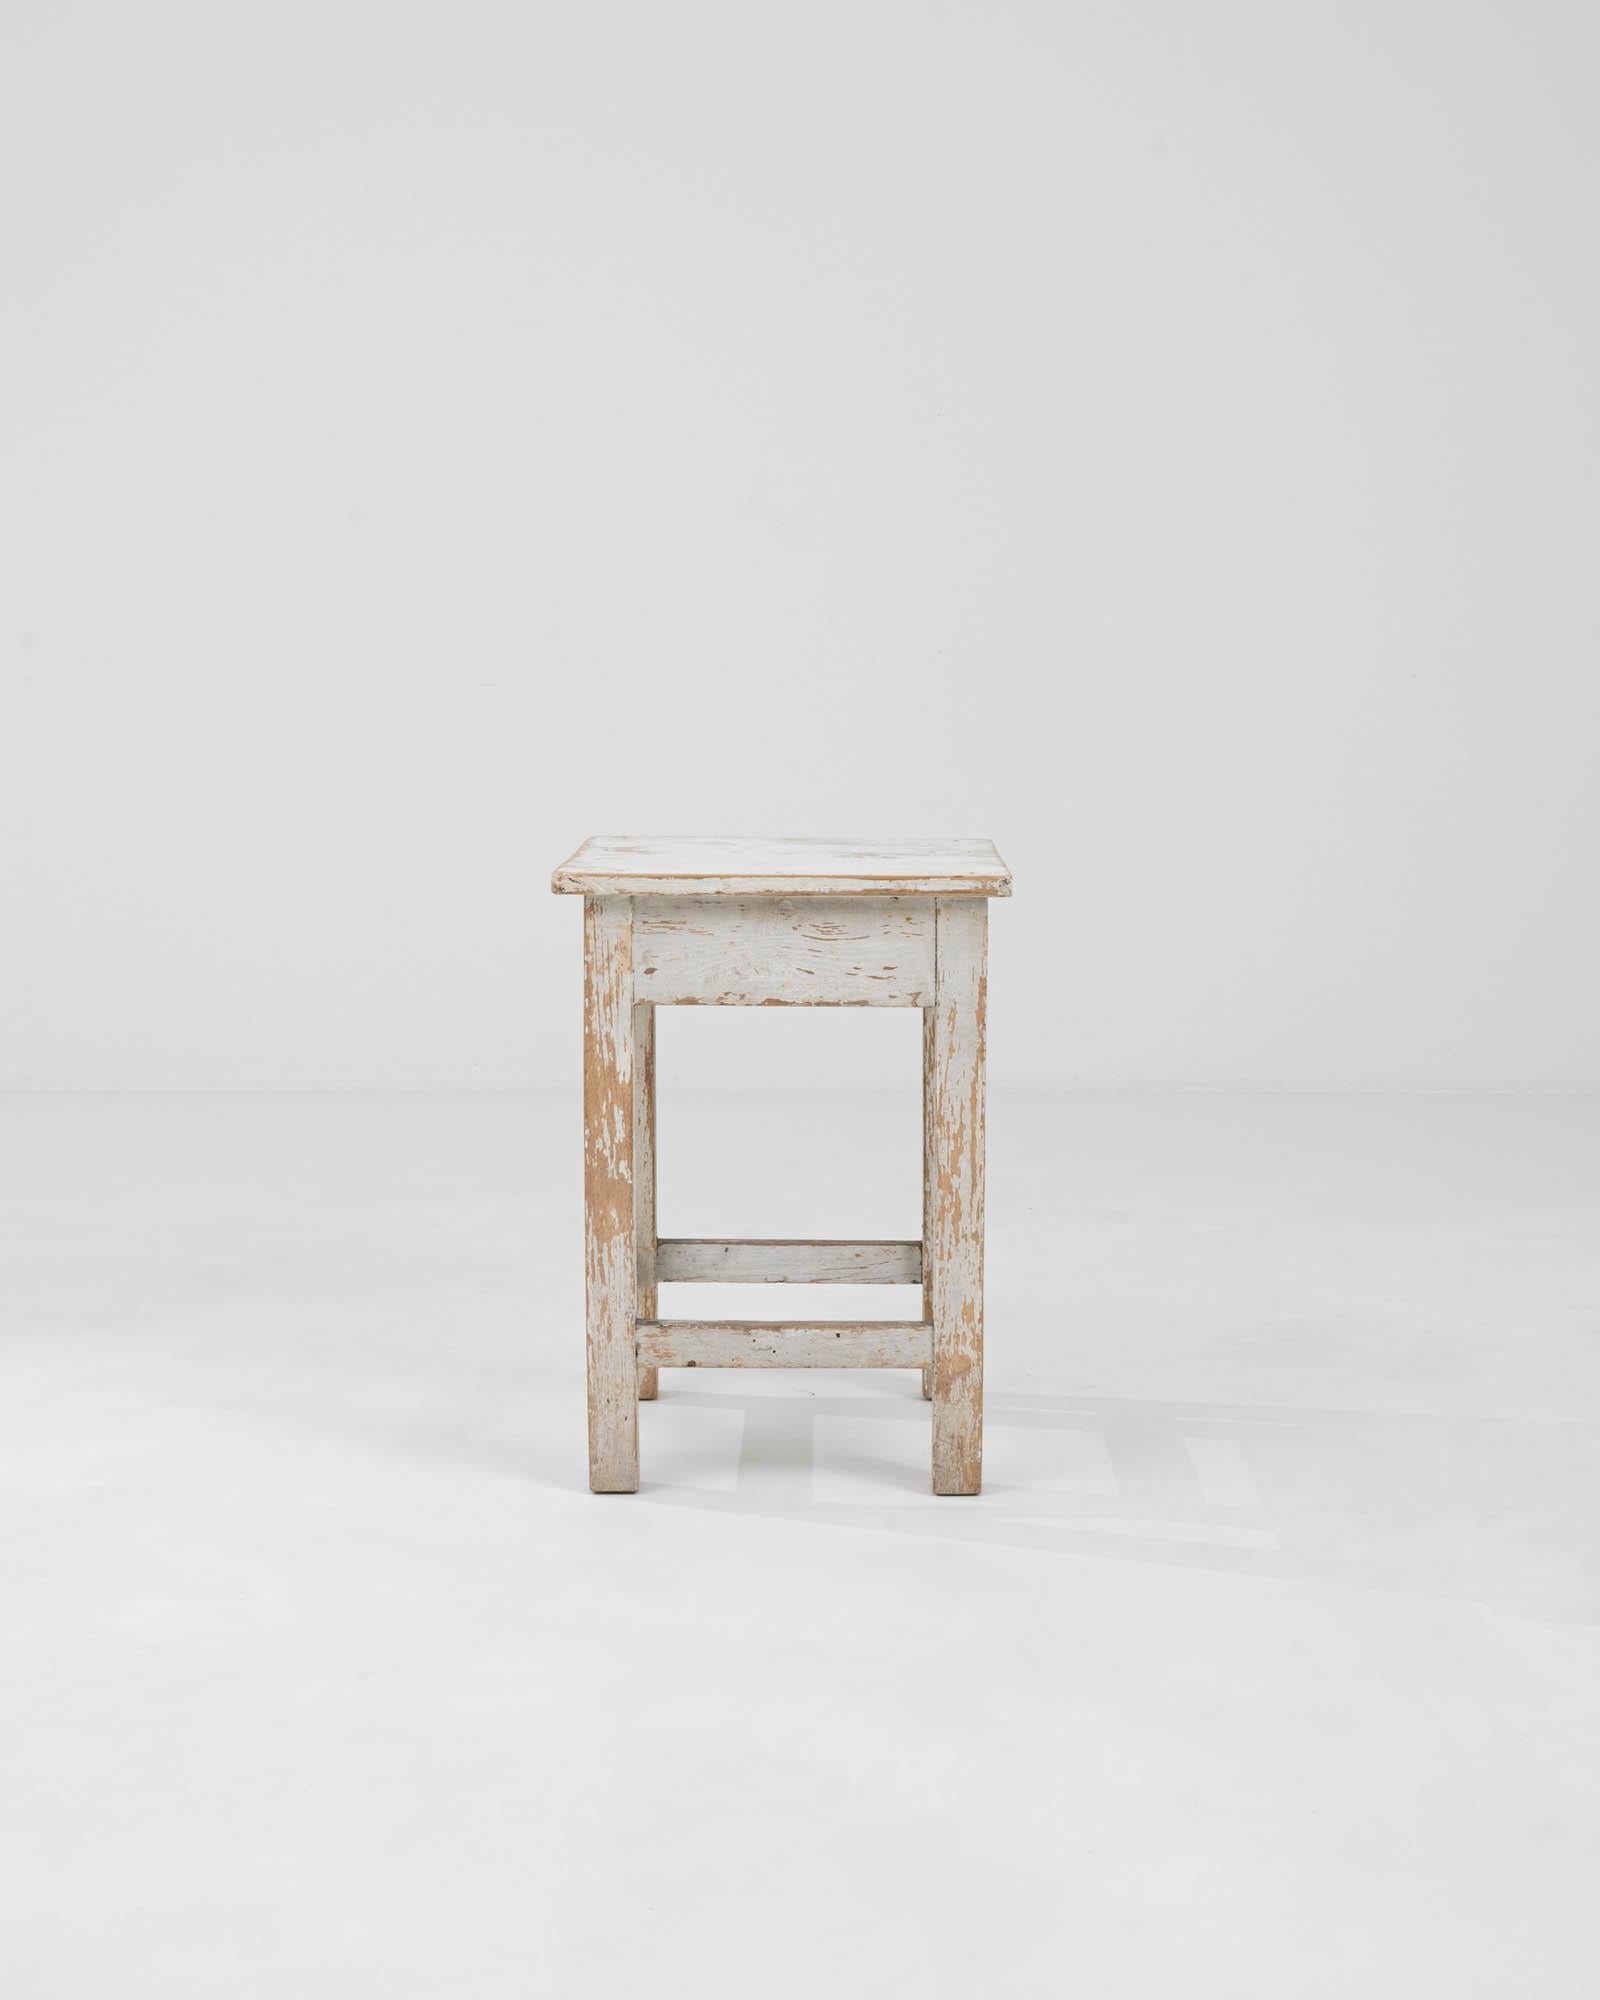 Embrace rustic charm with this Early 20th Century Central European Wood Patinated Stool. Its character-filled patina tells a story of years gone by, making it not just a piece of furniture, but a snippet of history. The stool's weathered white